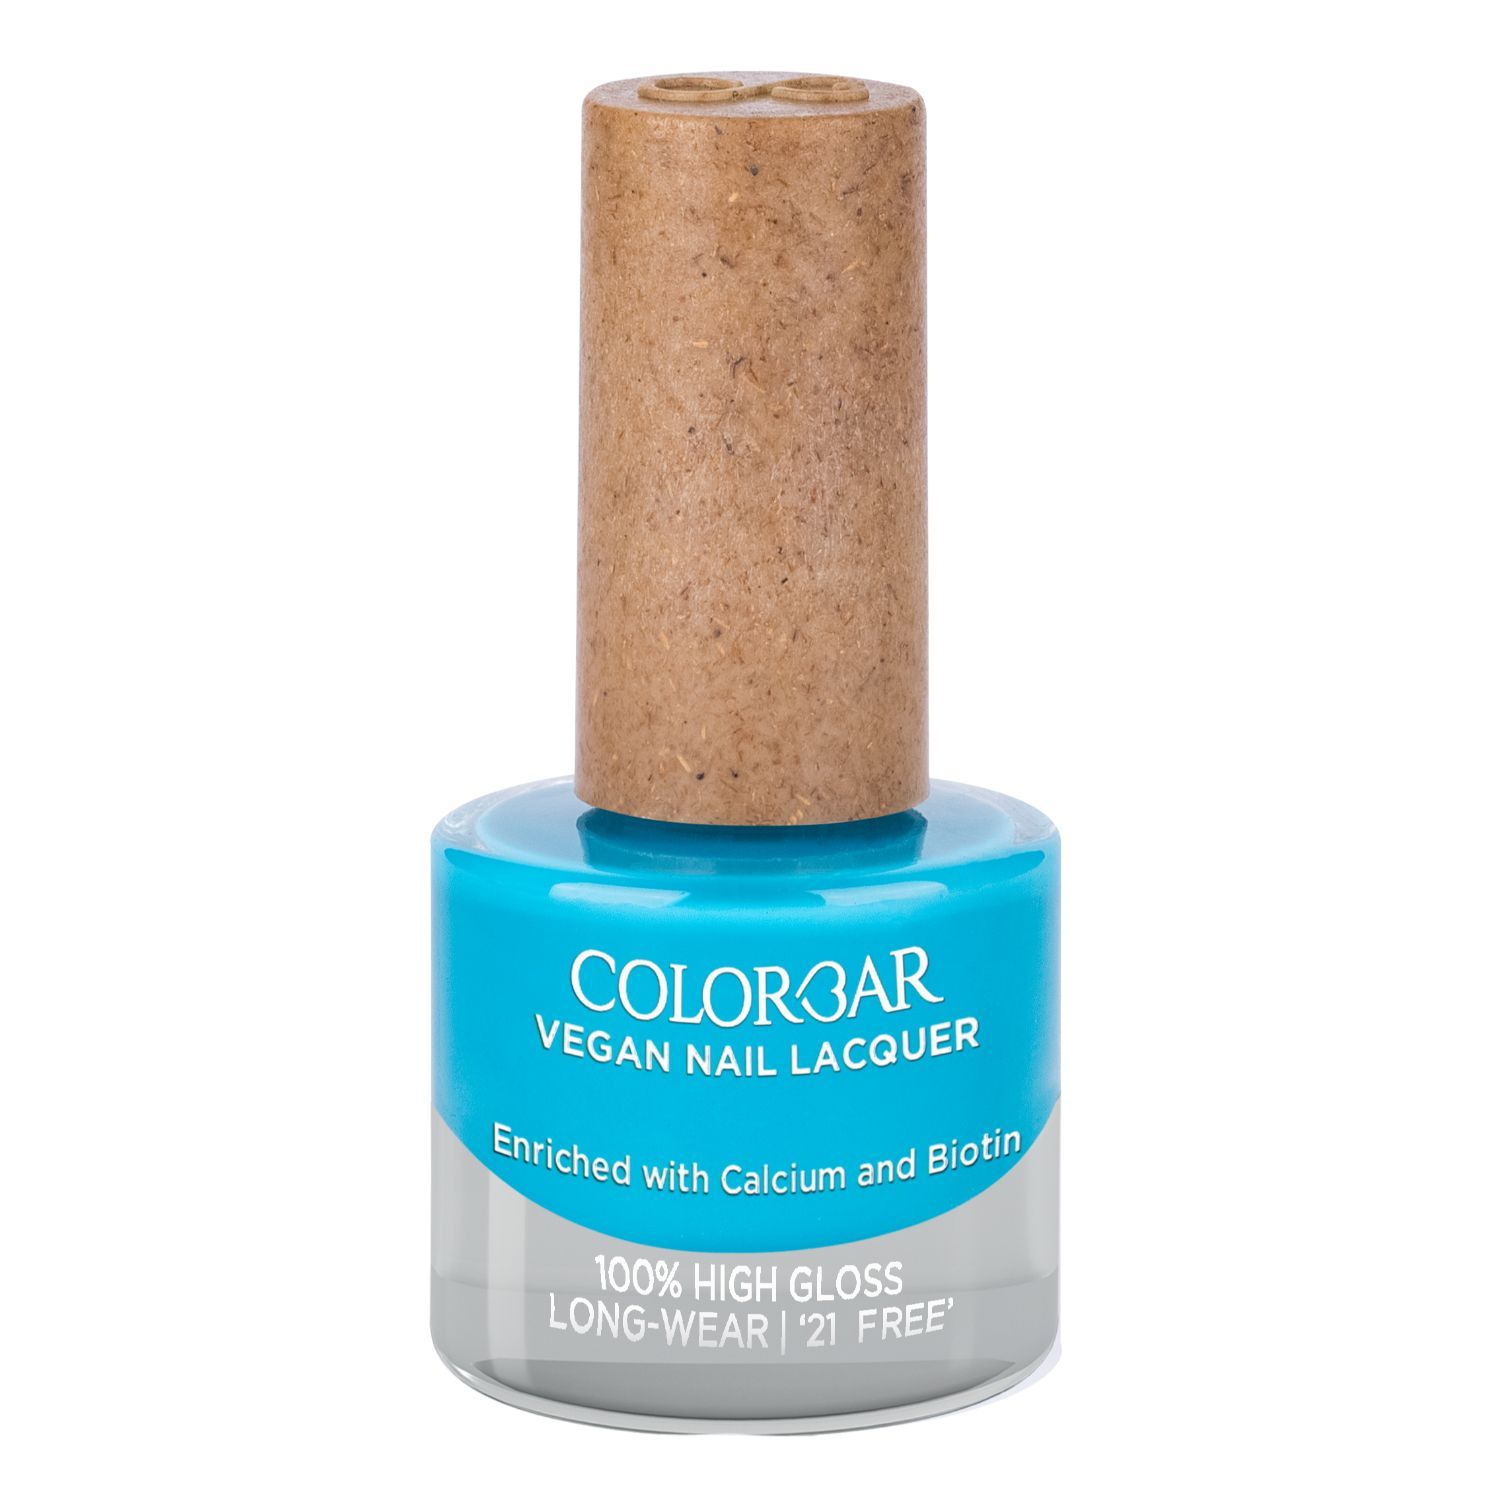 Colorbar Arteffects Nail Lacquer Swatches & Review | New Colorbar Nail  polishes | Nail lacquer, Nail polish, Beautiful nail polish